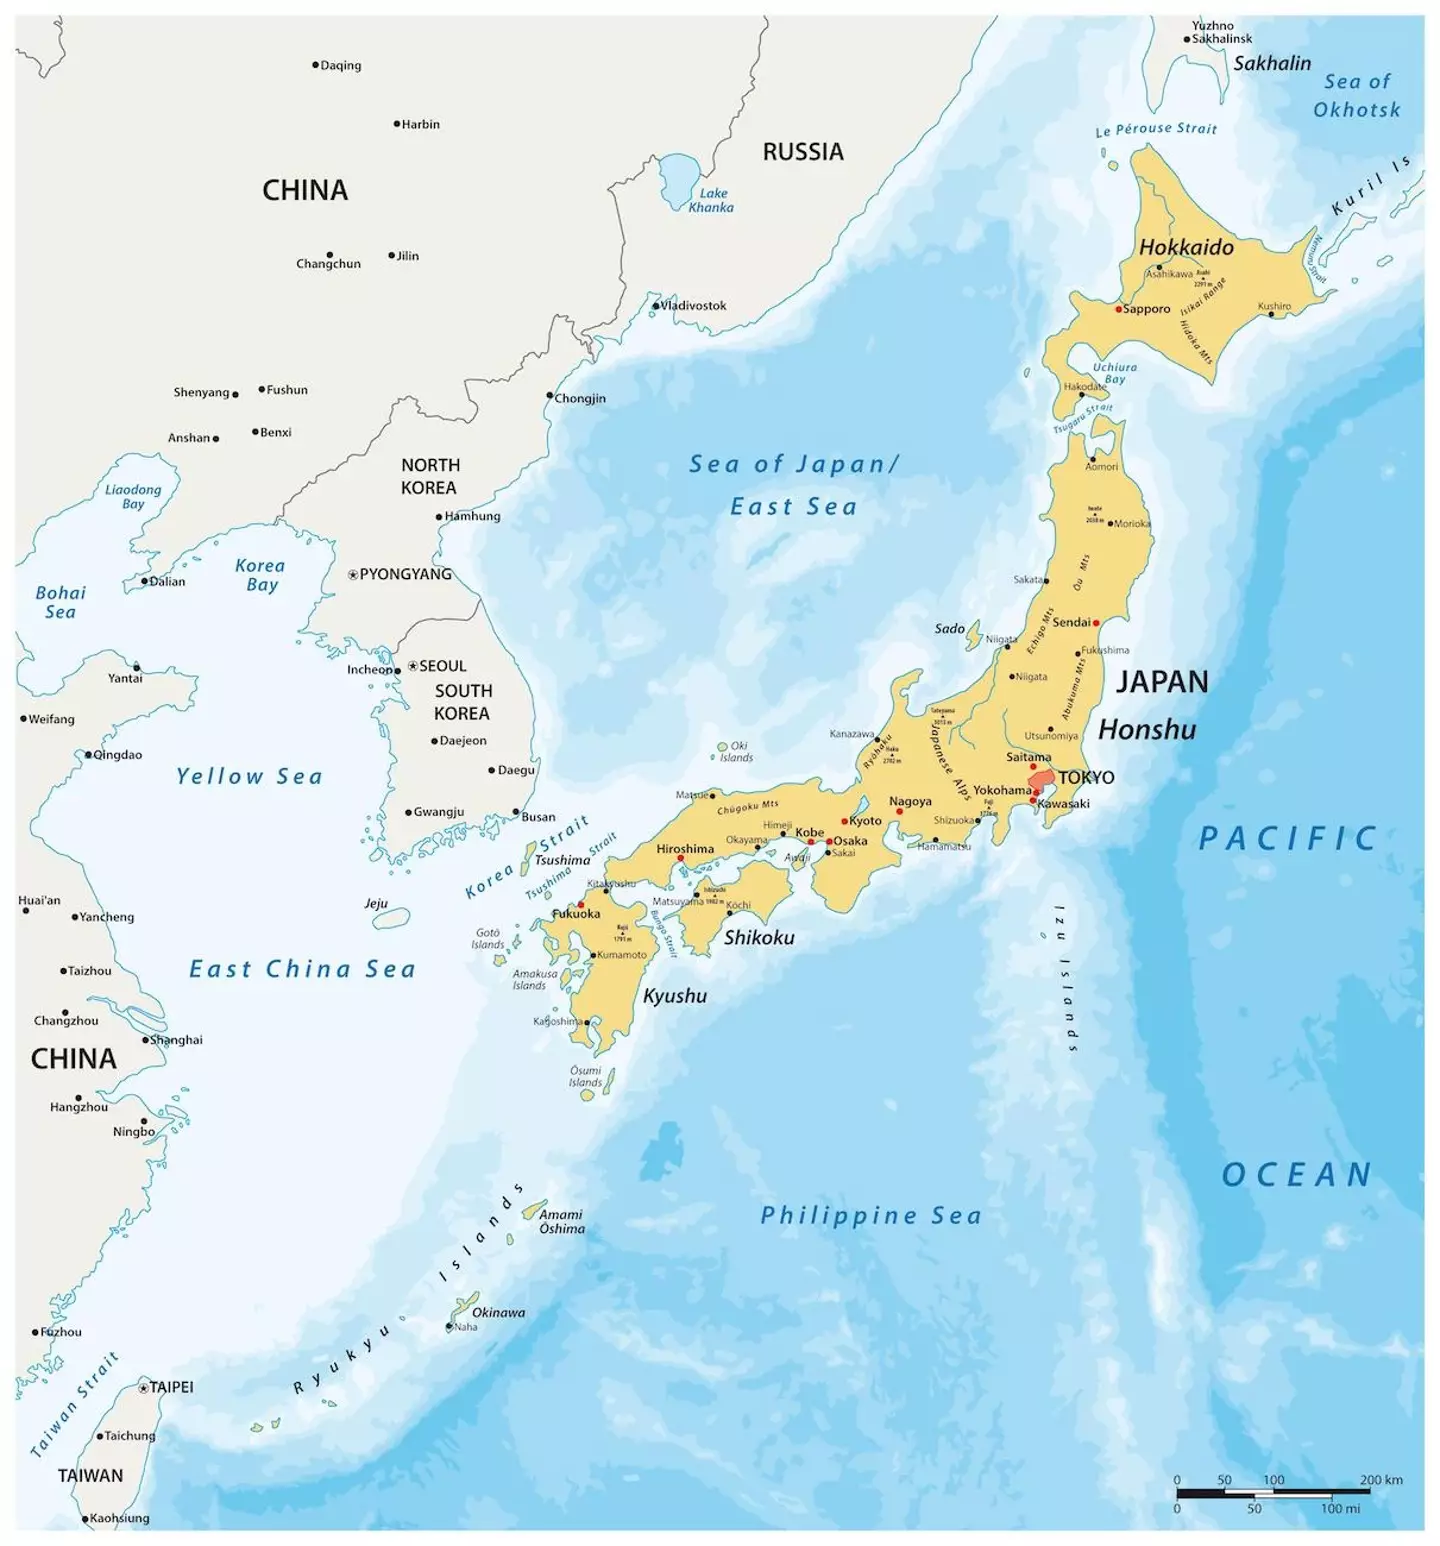 Japan currently has 6,852 islands on record.